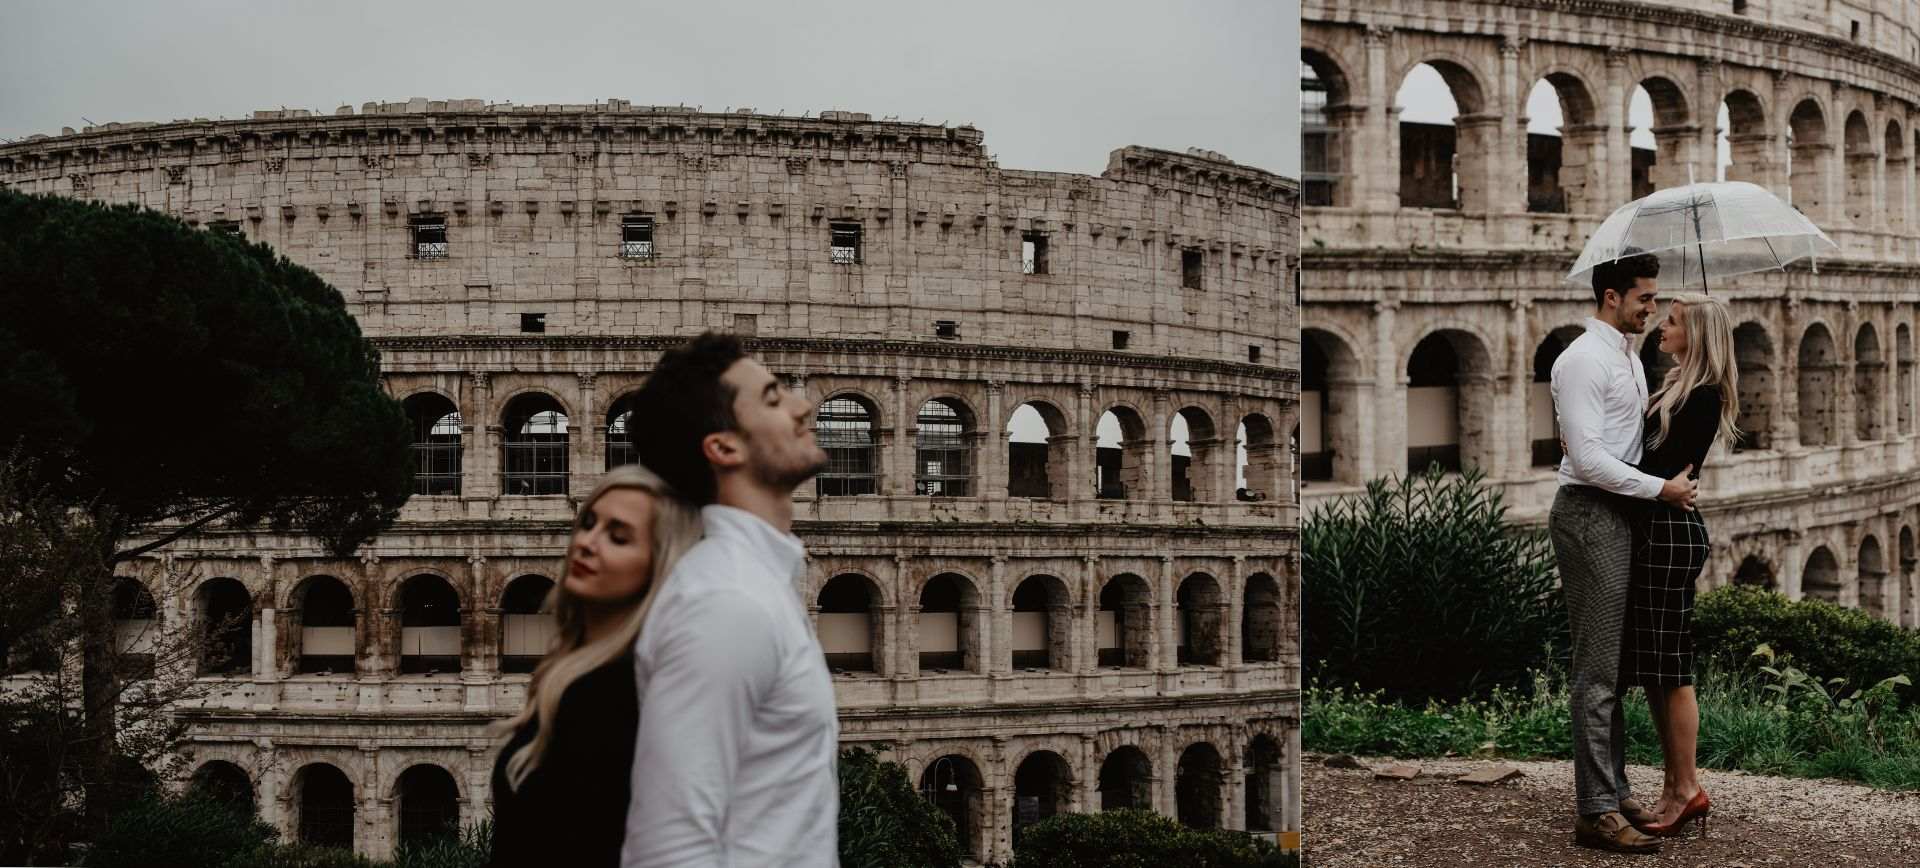 rome couple photoshoot in italy engagement photos